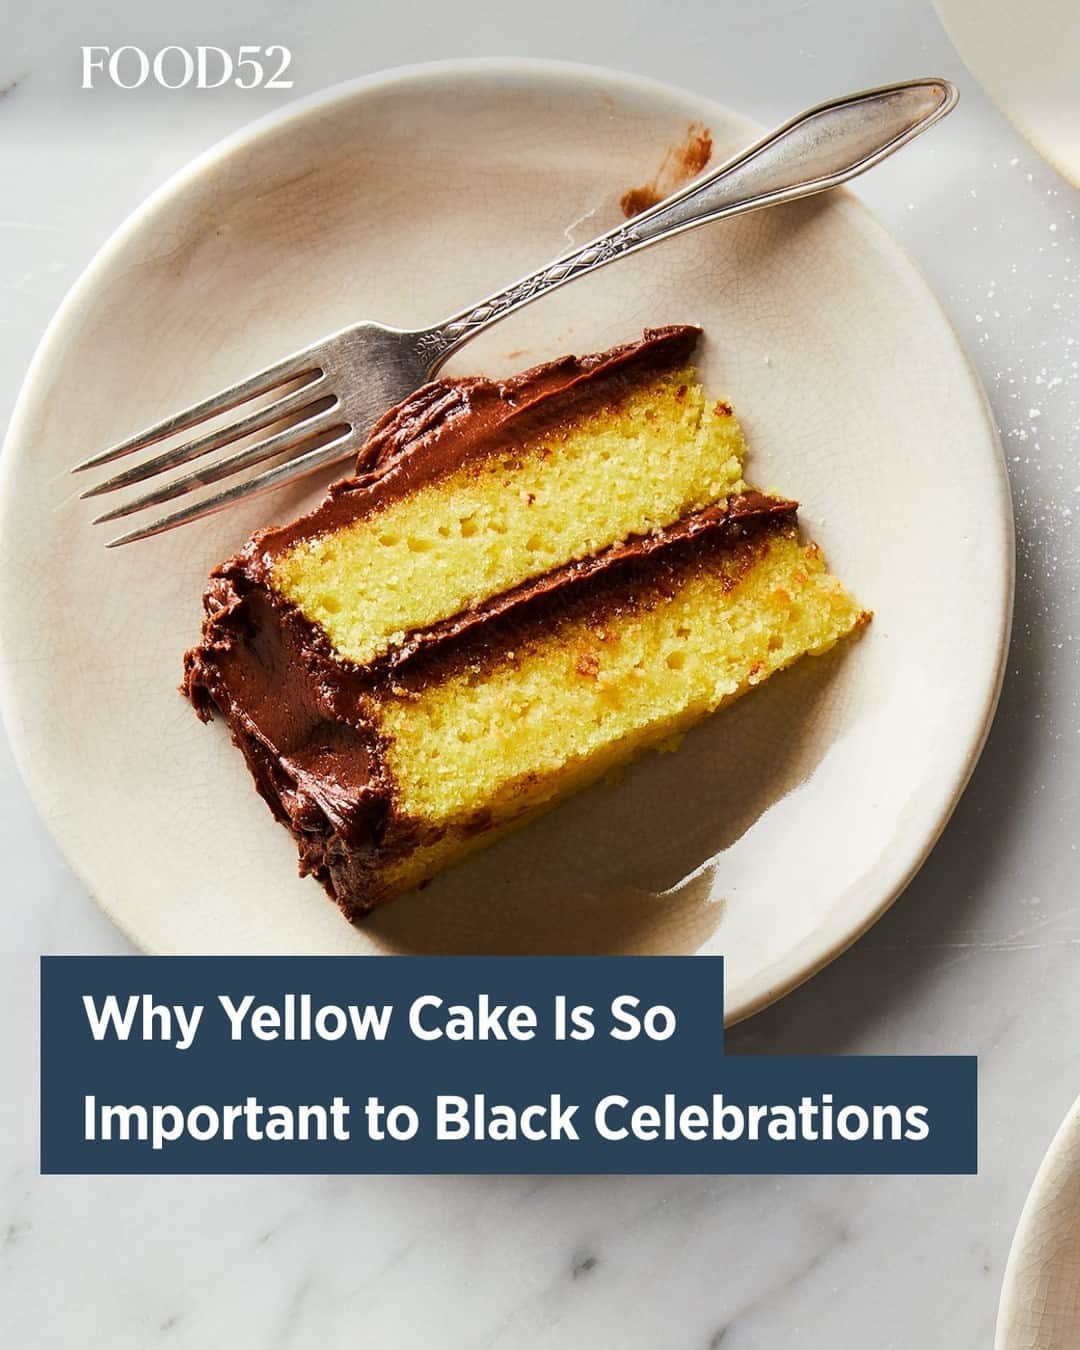 Food52のインスタグラム：「"From a box or from scratch, it's an essential element of my community." — @audiophilegirl explains the history and importance of yellow cake to her community at the link in our bio. 📸: @rockyluten #f52community #f52grams」